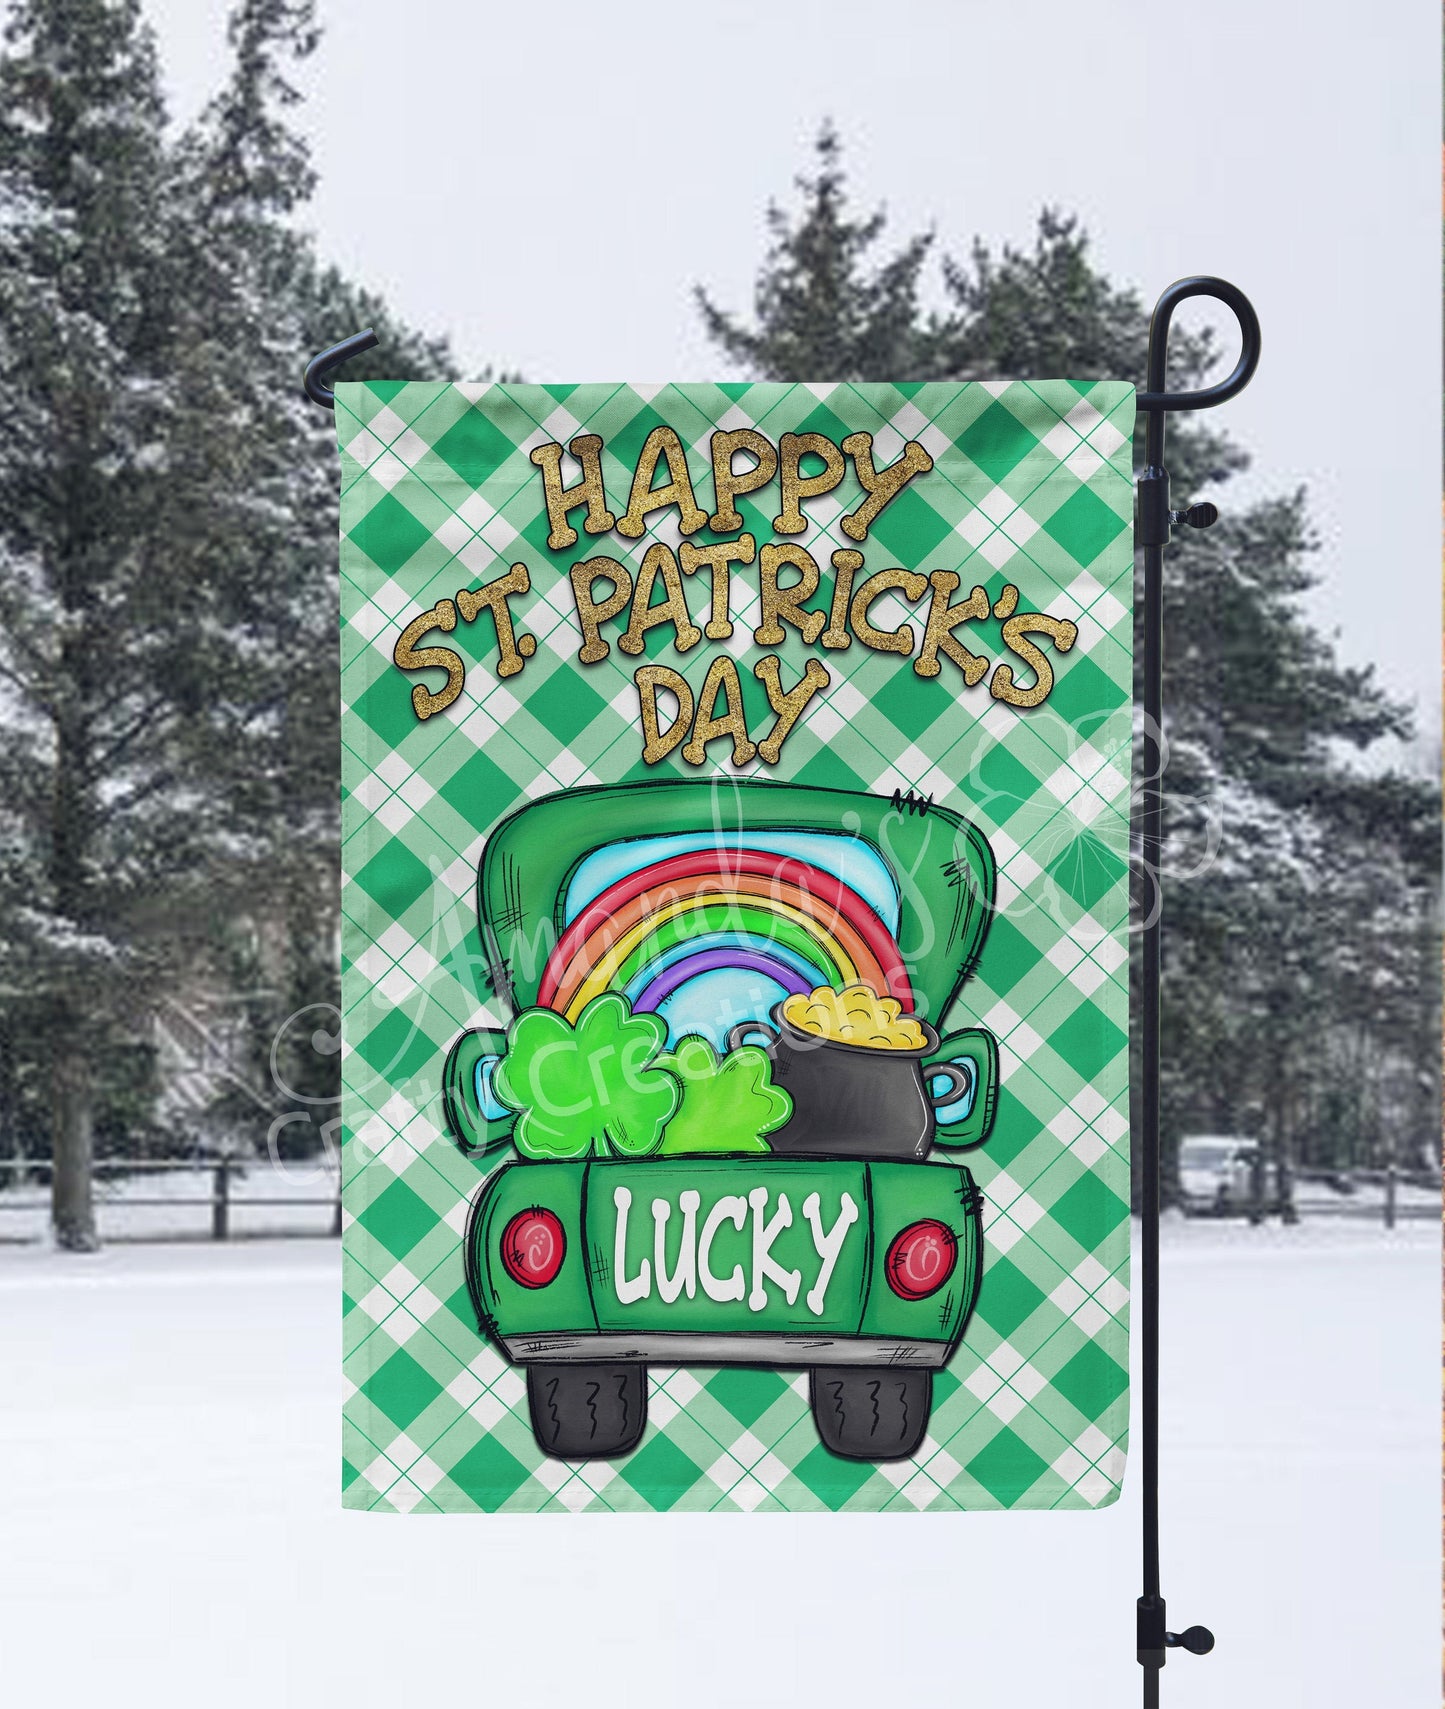 Happy St. Patrick's Day garden flag with green antique truck